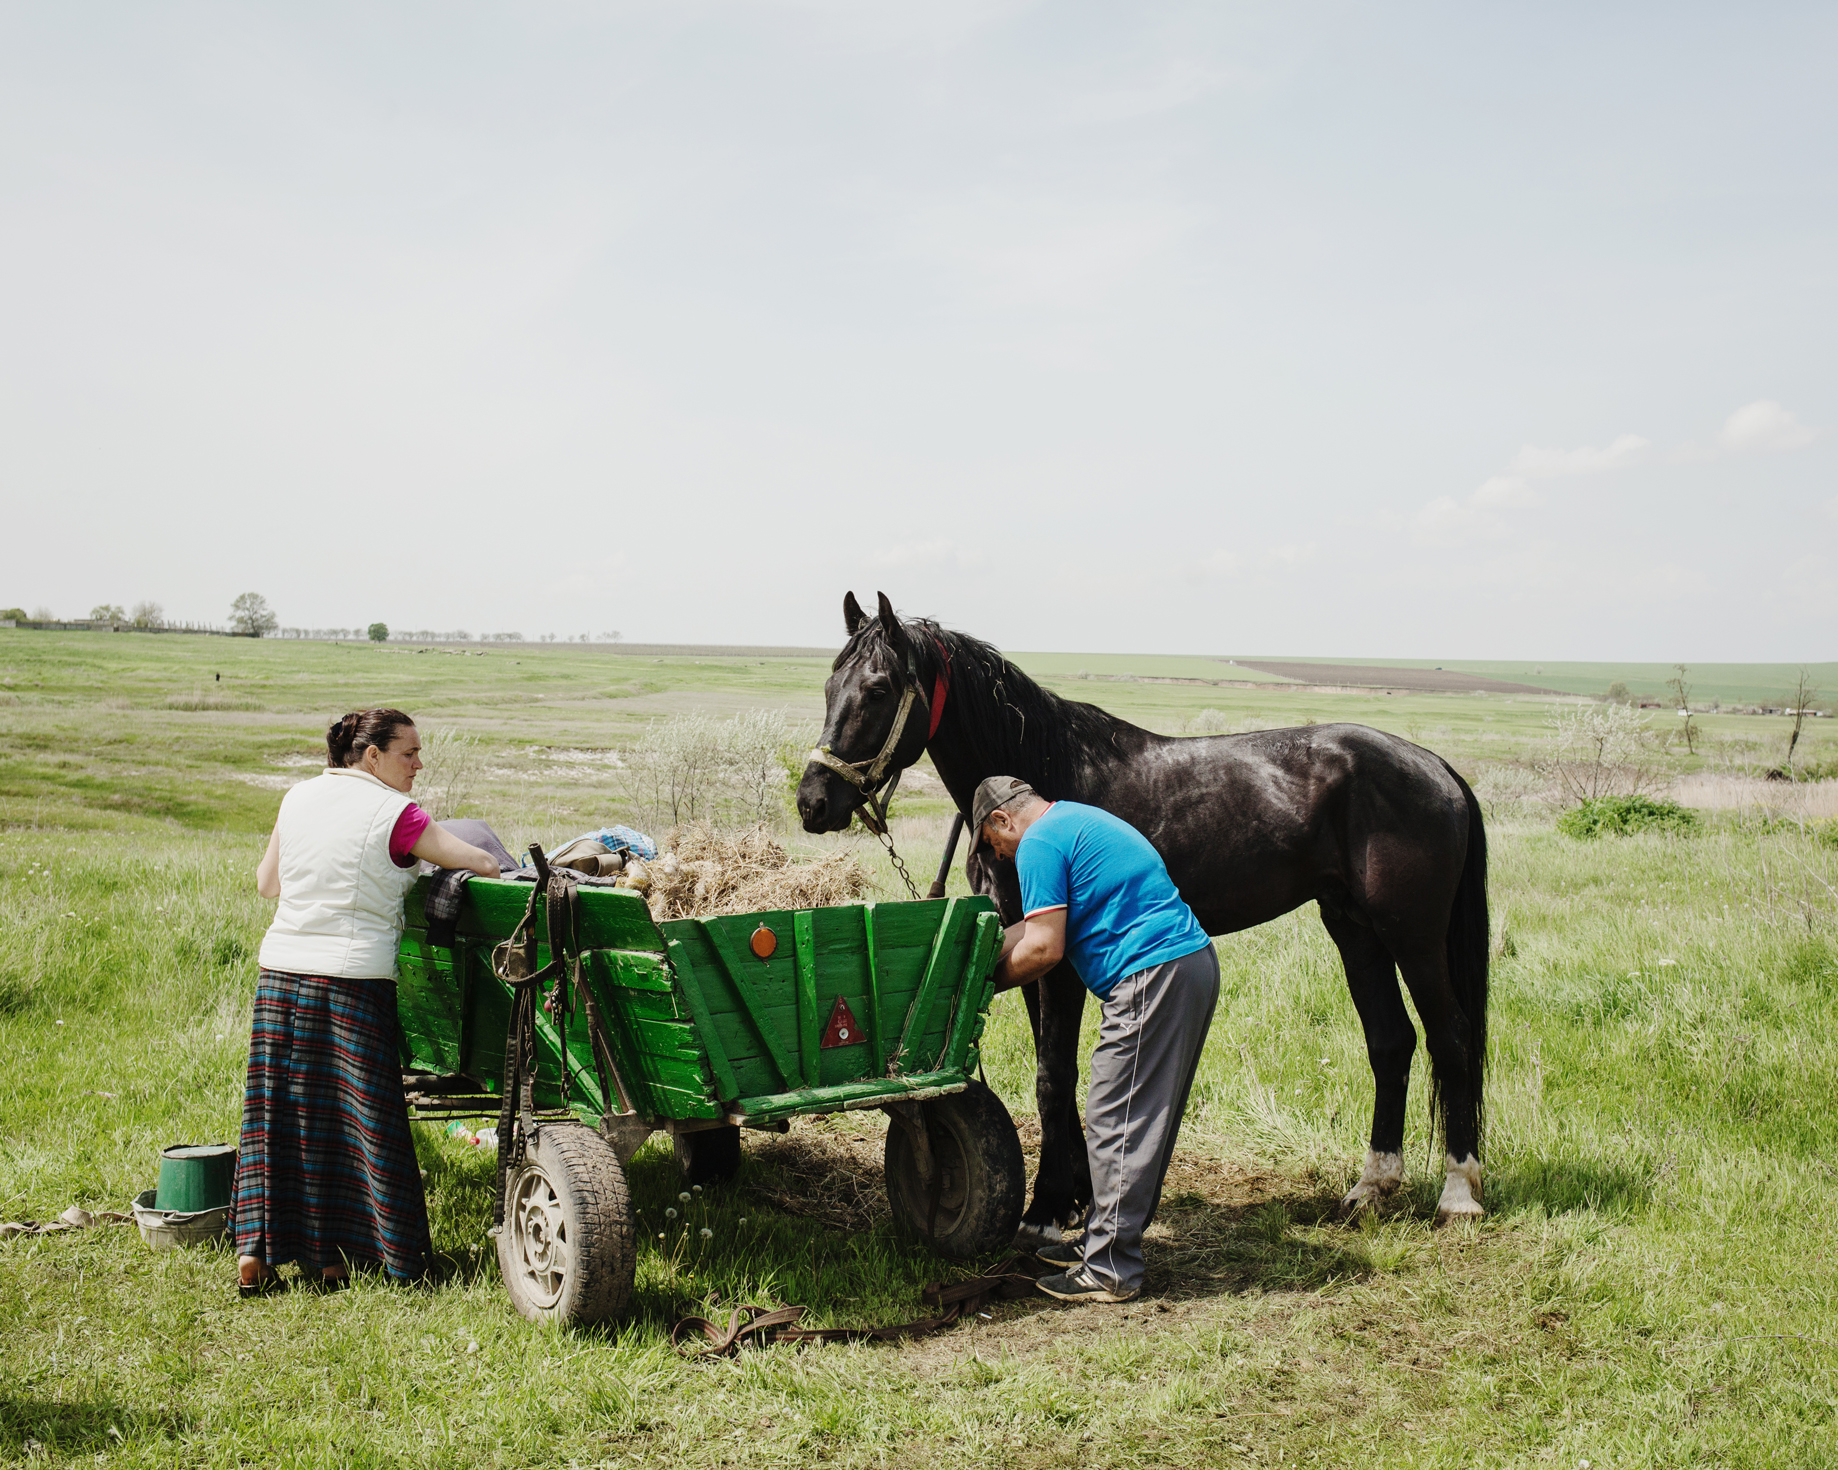  Ceadir-Lunga - During the yearly Hederlez horse races, Nicolaï, a participant, prepares his horse Lipitune before the race with his wife Irina. 